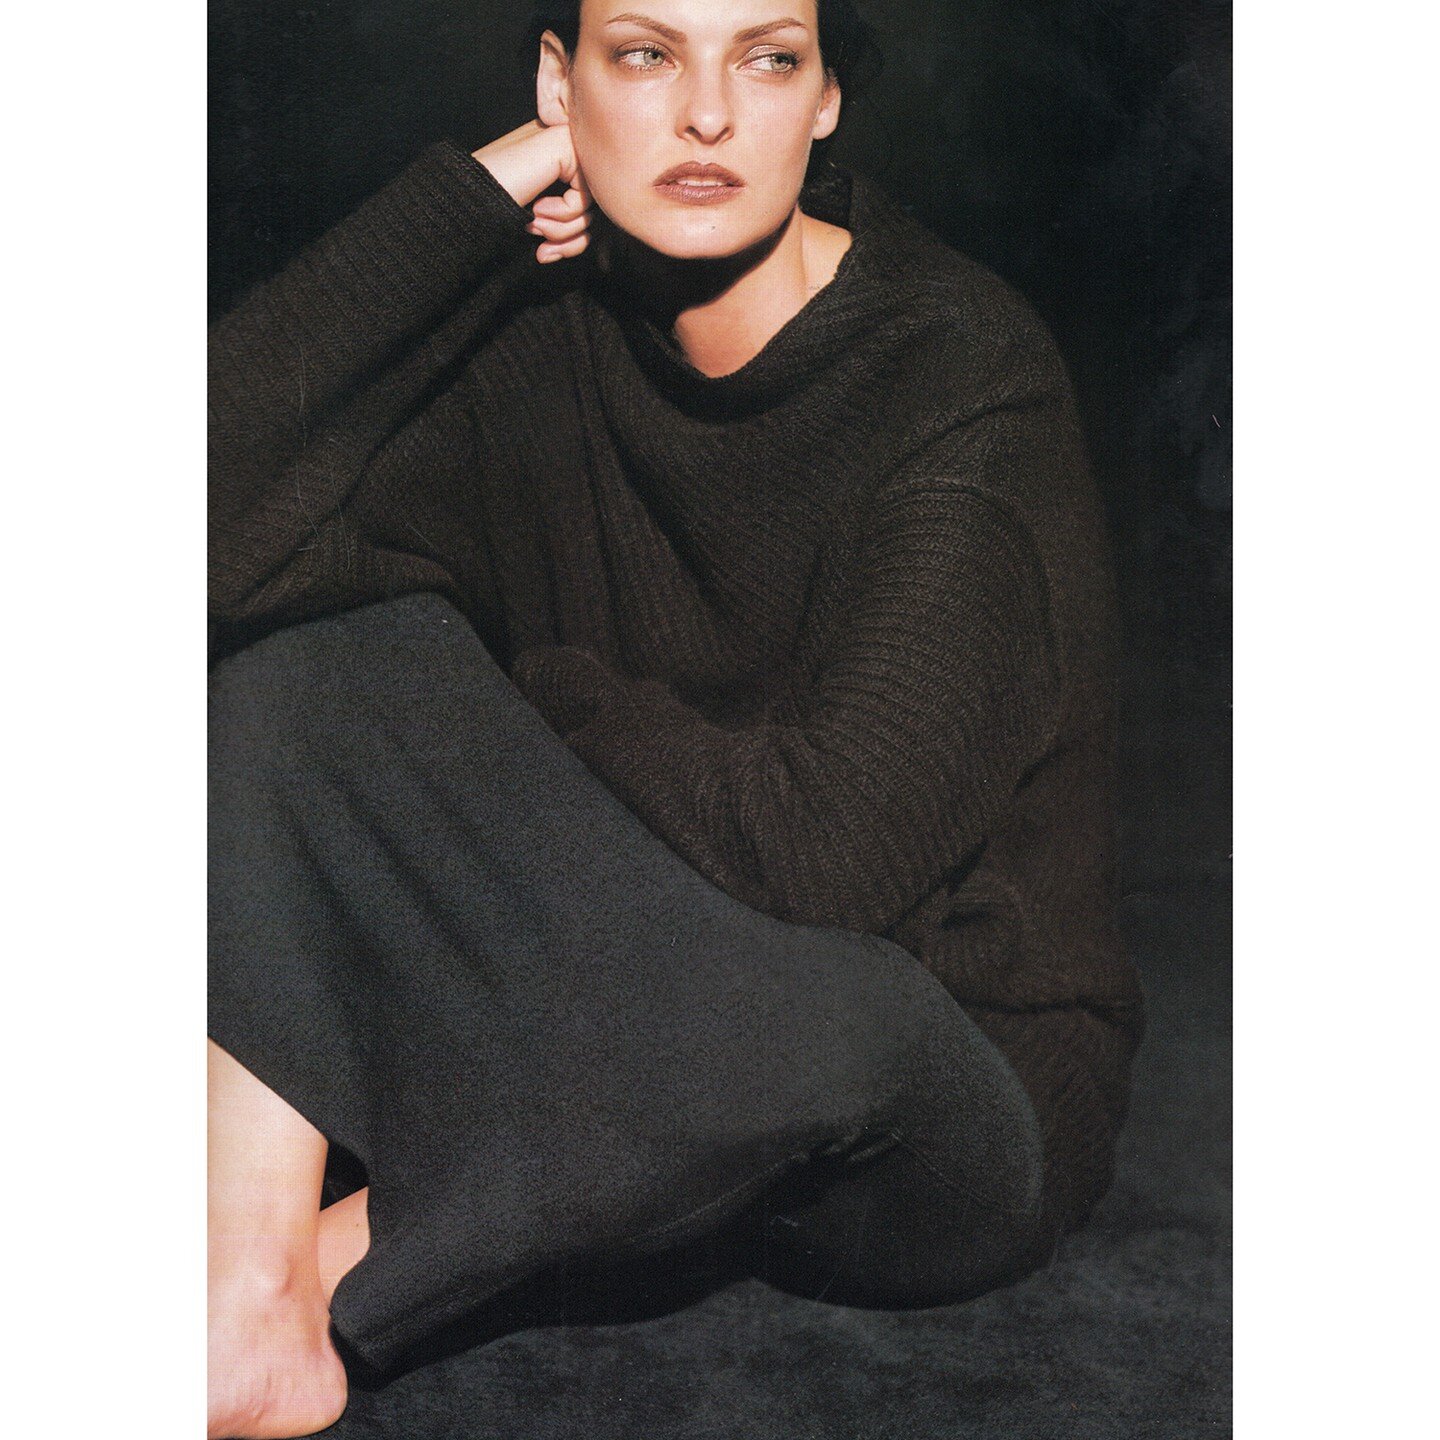 #CASHMERE #donnakarannewyork 
#ARCHIVE #90's #throwback ✨ 
⚡ its been 30 years ago I arrived in New York City working for the legendary designer Donna Karan. as the iconic brand is now relaunching, we will hear a lot about the &quot;system&quot; of d